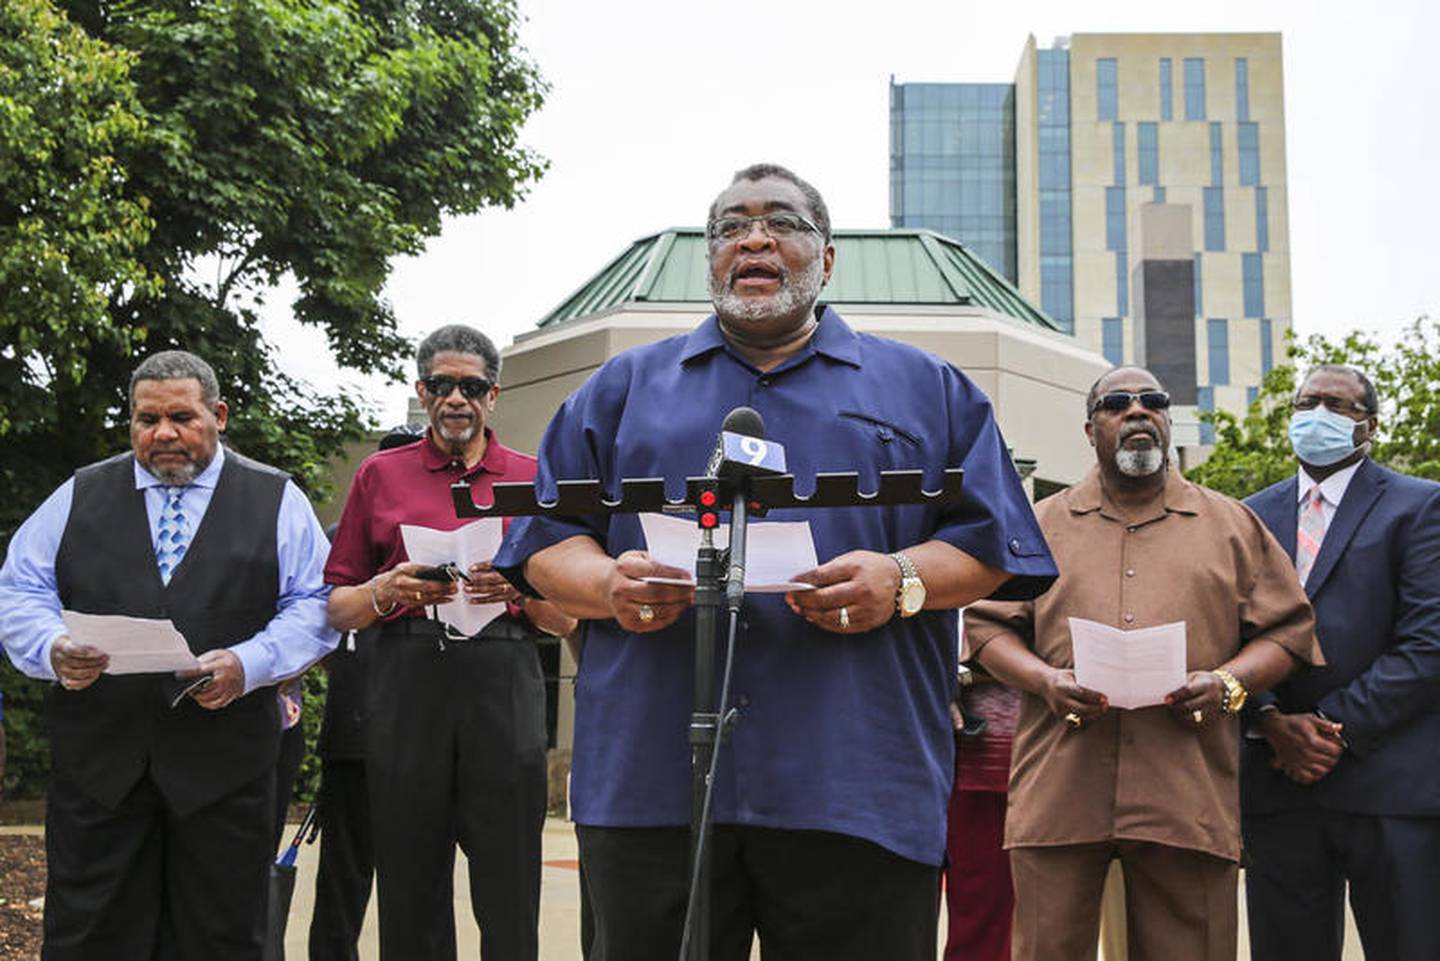 Pastor Warren Dorris speaks to the media Wednesday, Jun. 3, 2020, during a press conference addressing the physical actions taken by Mayor Bob O'Dekirk against a protestor during a demonstration Monday night in Joliet, Ill.